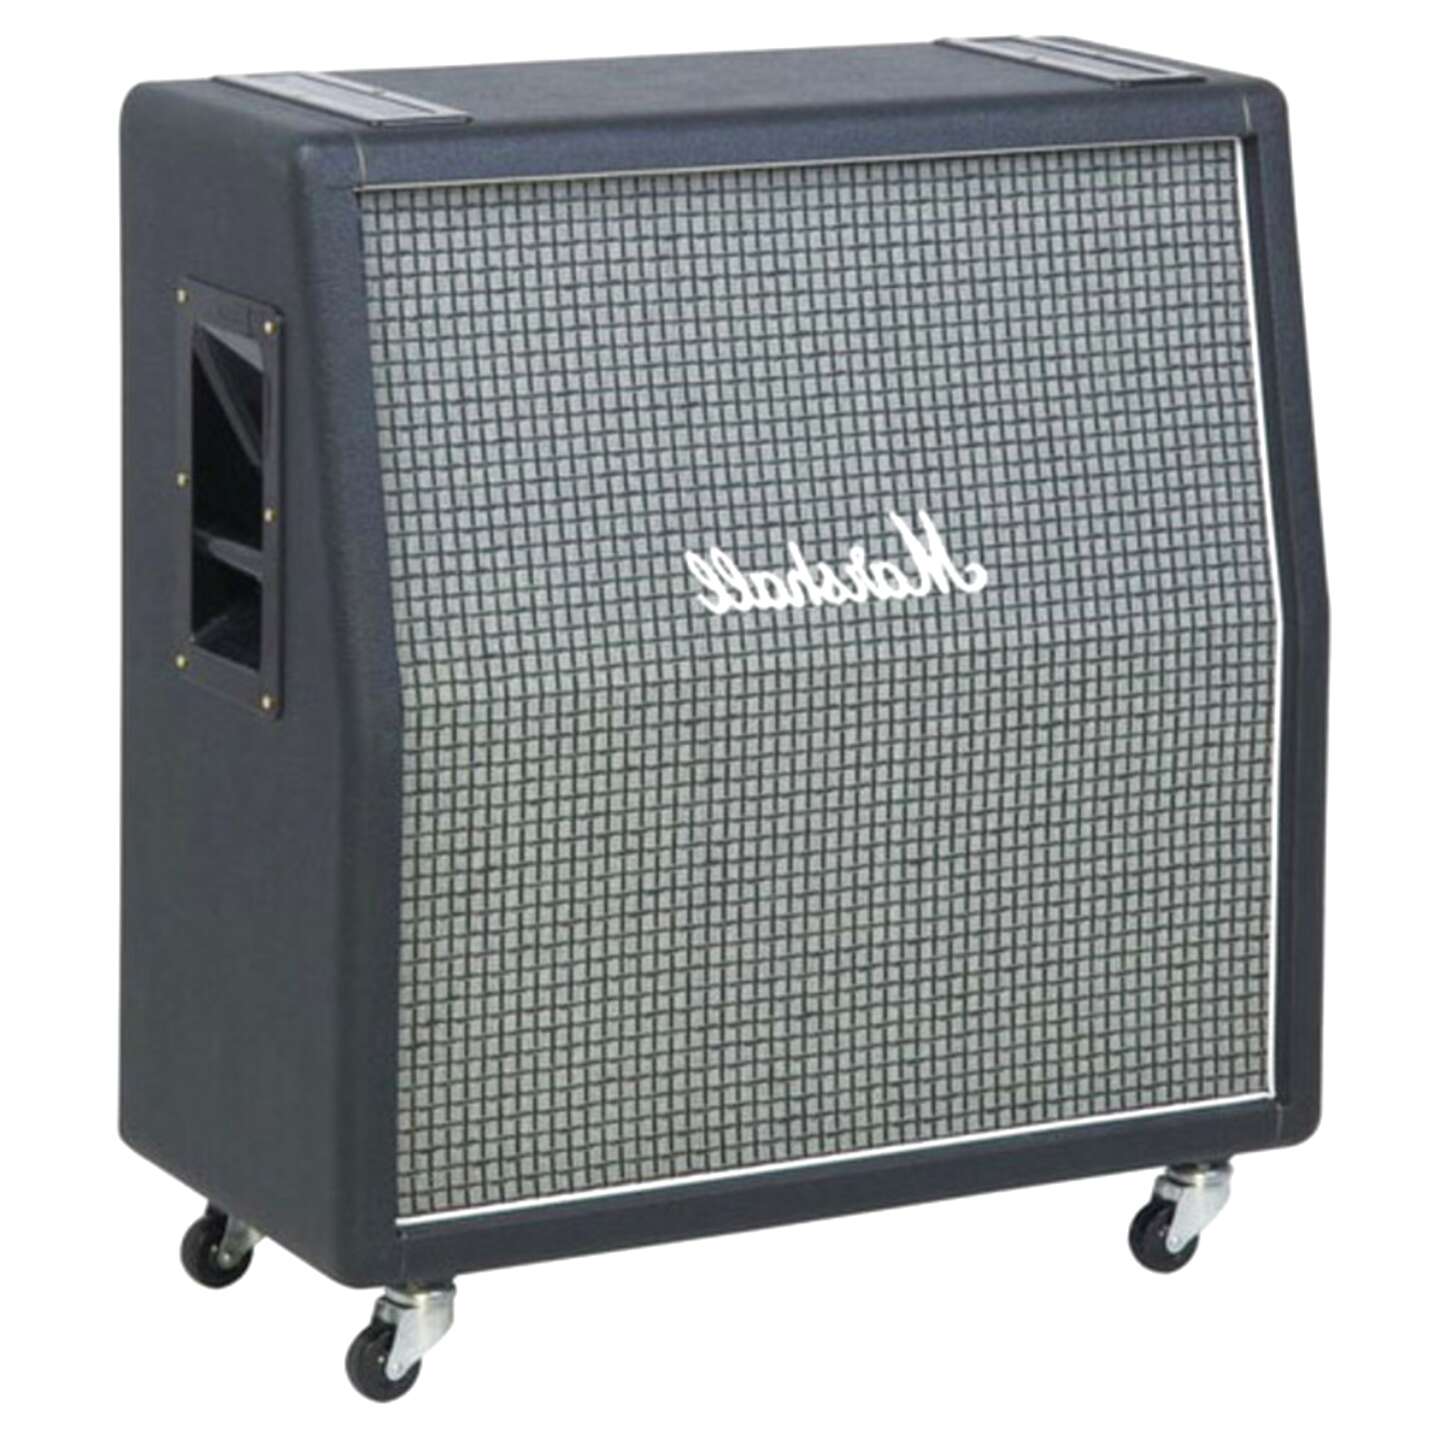 4X12 for sale in UK | 79 used 4X12